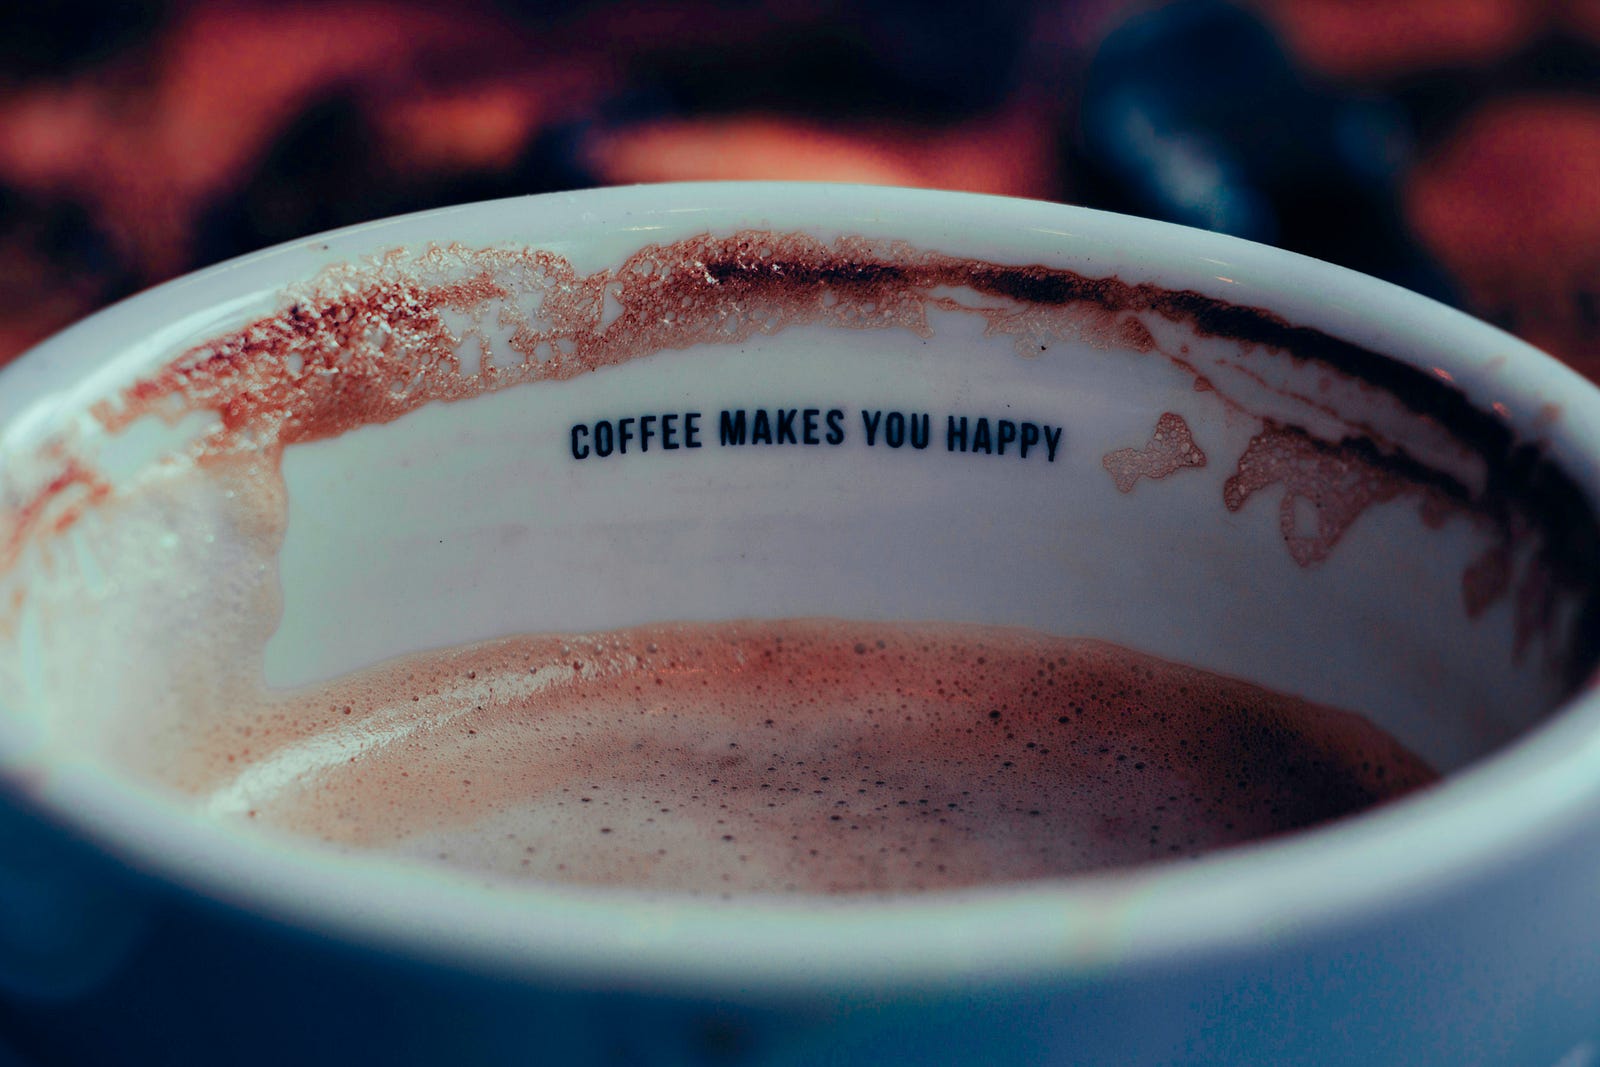 A cup with coffee, with the words “Coffee makes you happy” written on the upper inside of it.